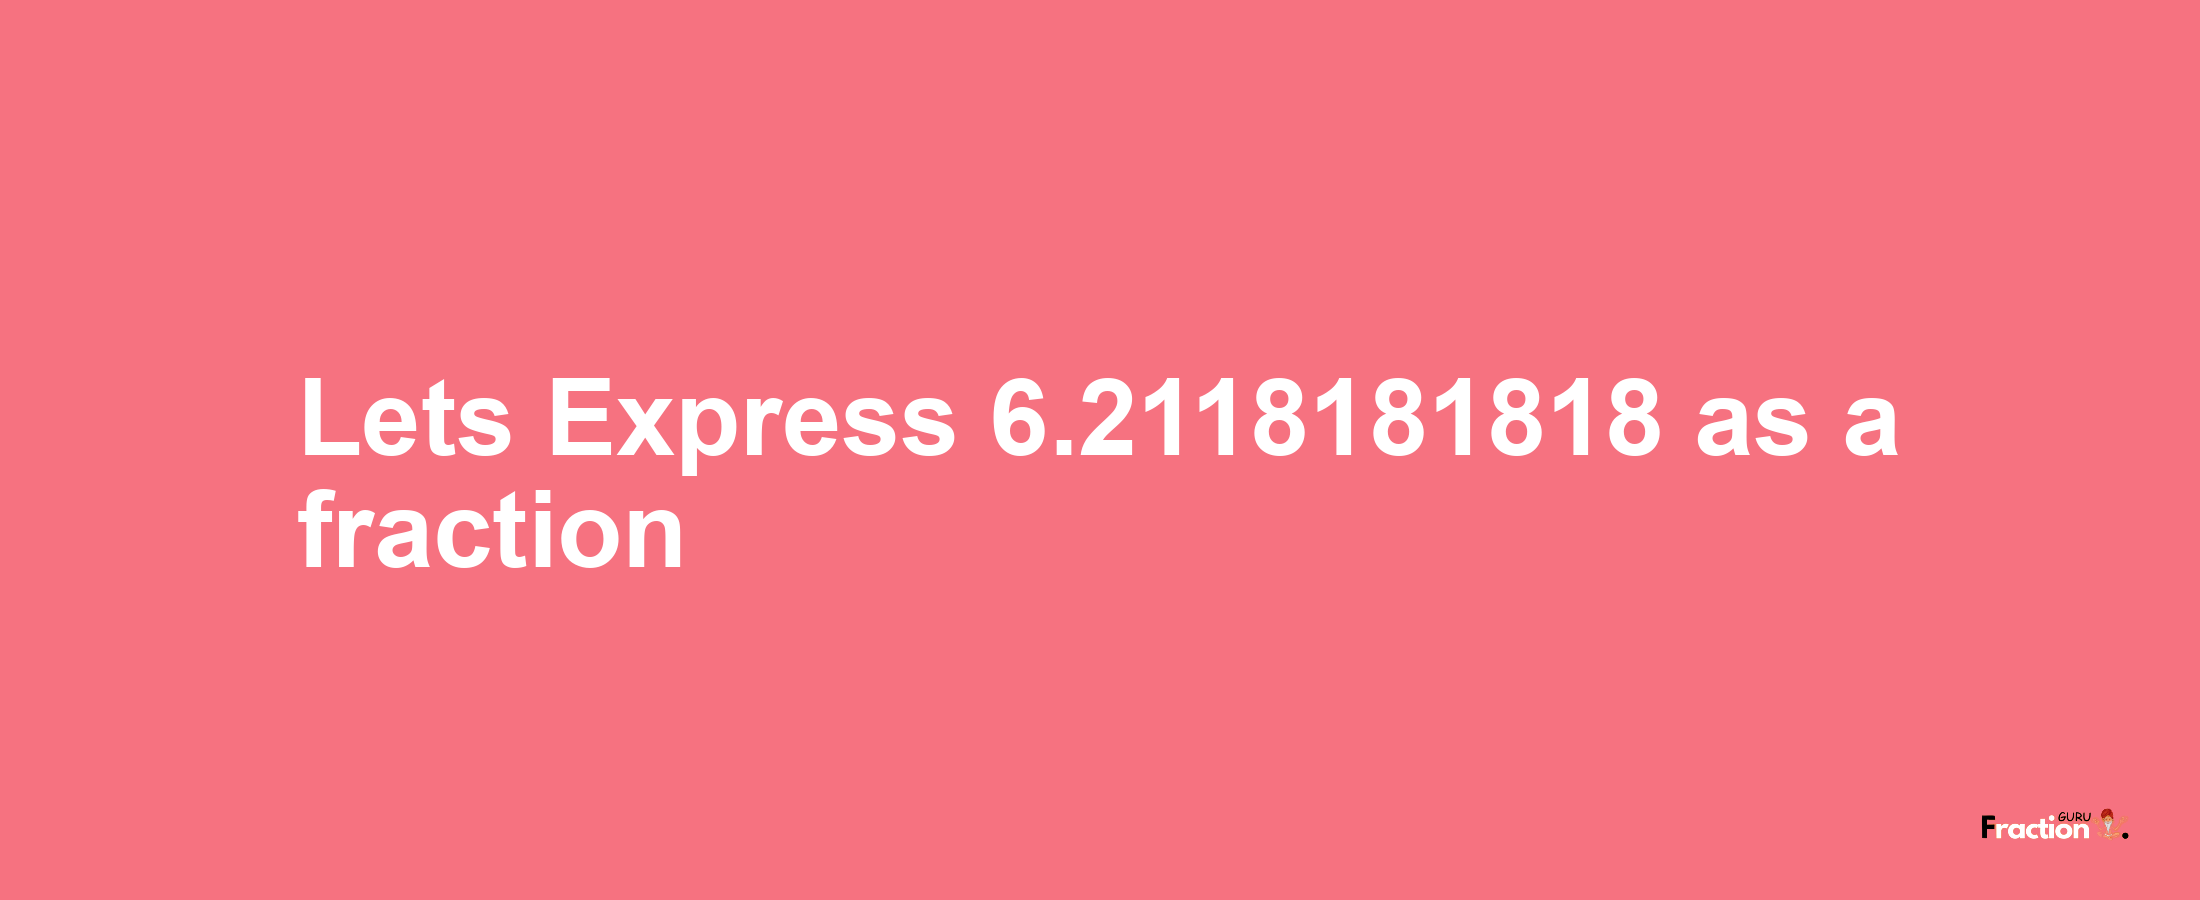 Lets Express 6.2118181818 as afraction